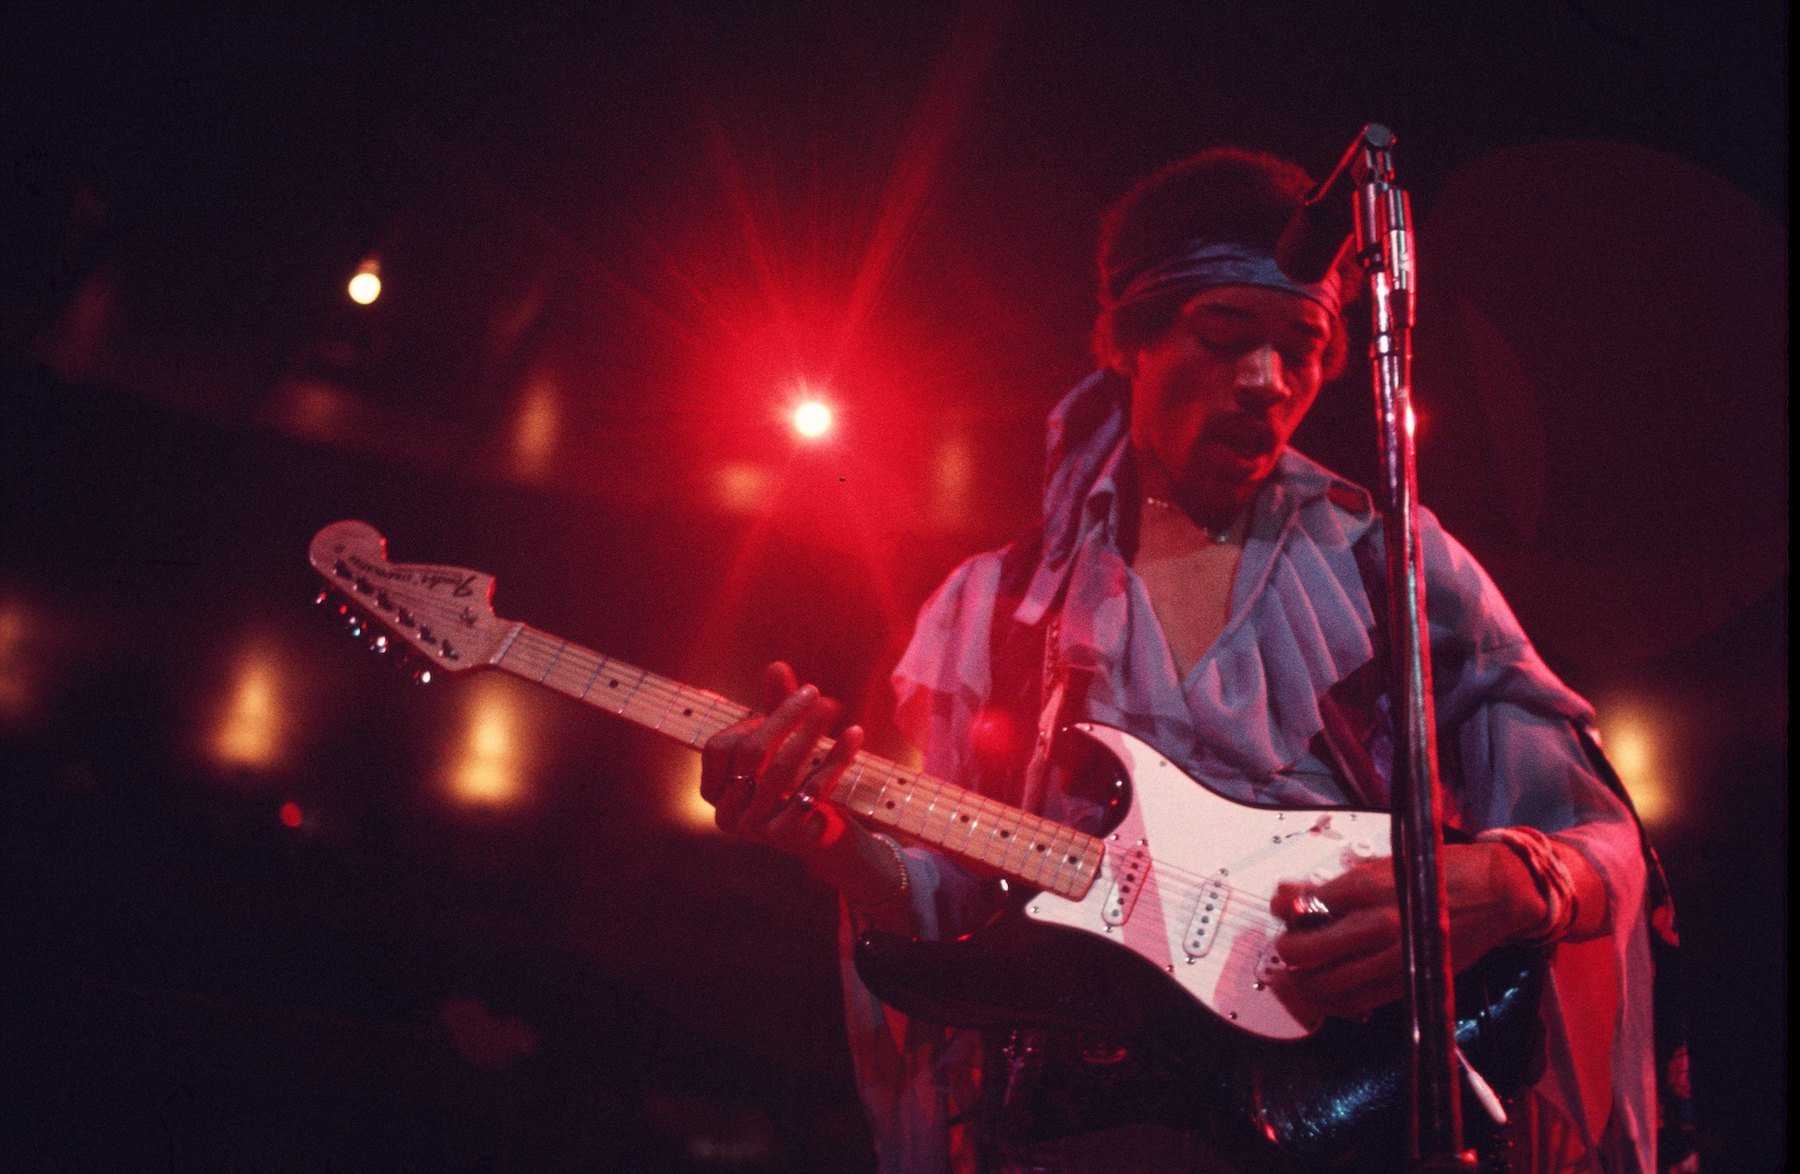 Jimi Hendrix, artist behind albums such as 'Electric Ladyland' and 'Are You Experienced,' performing on stage playing guitar